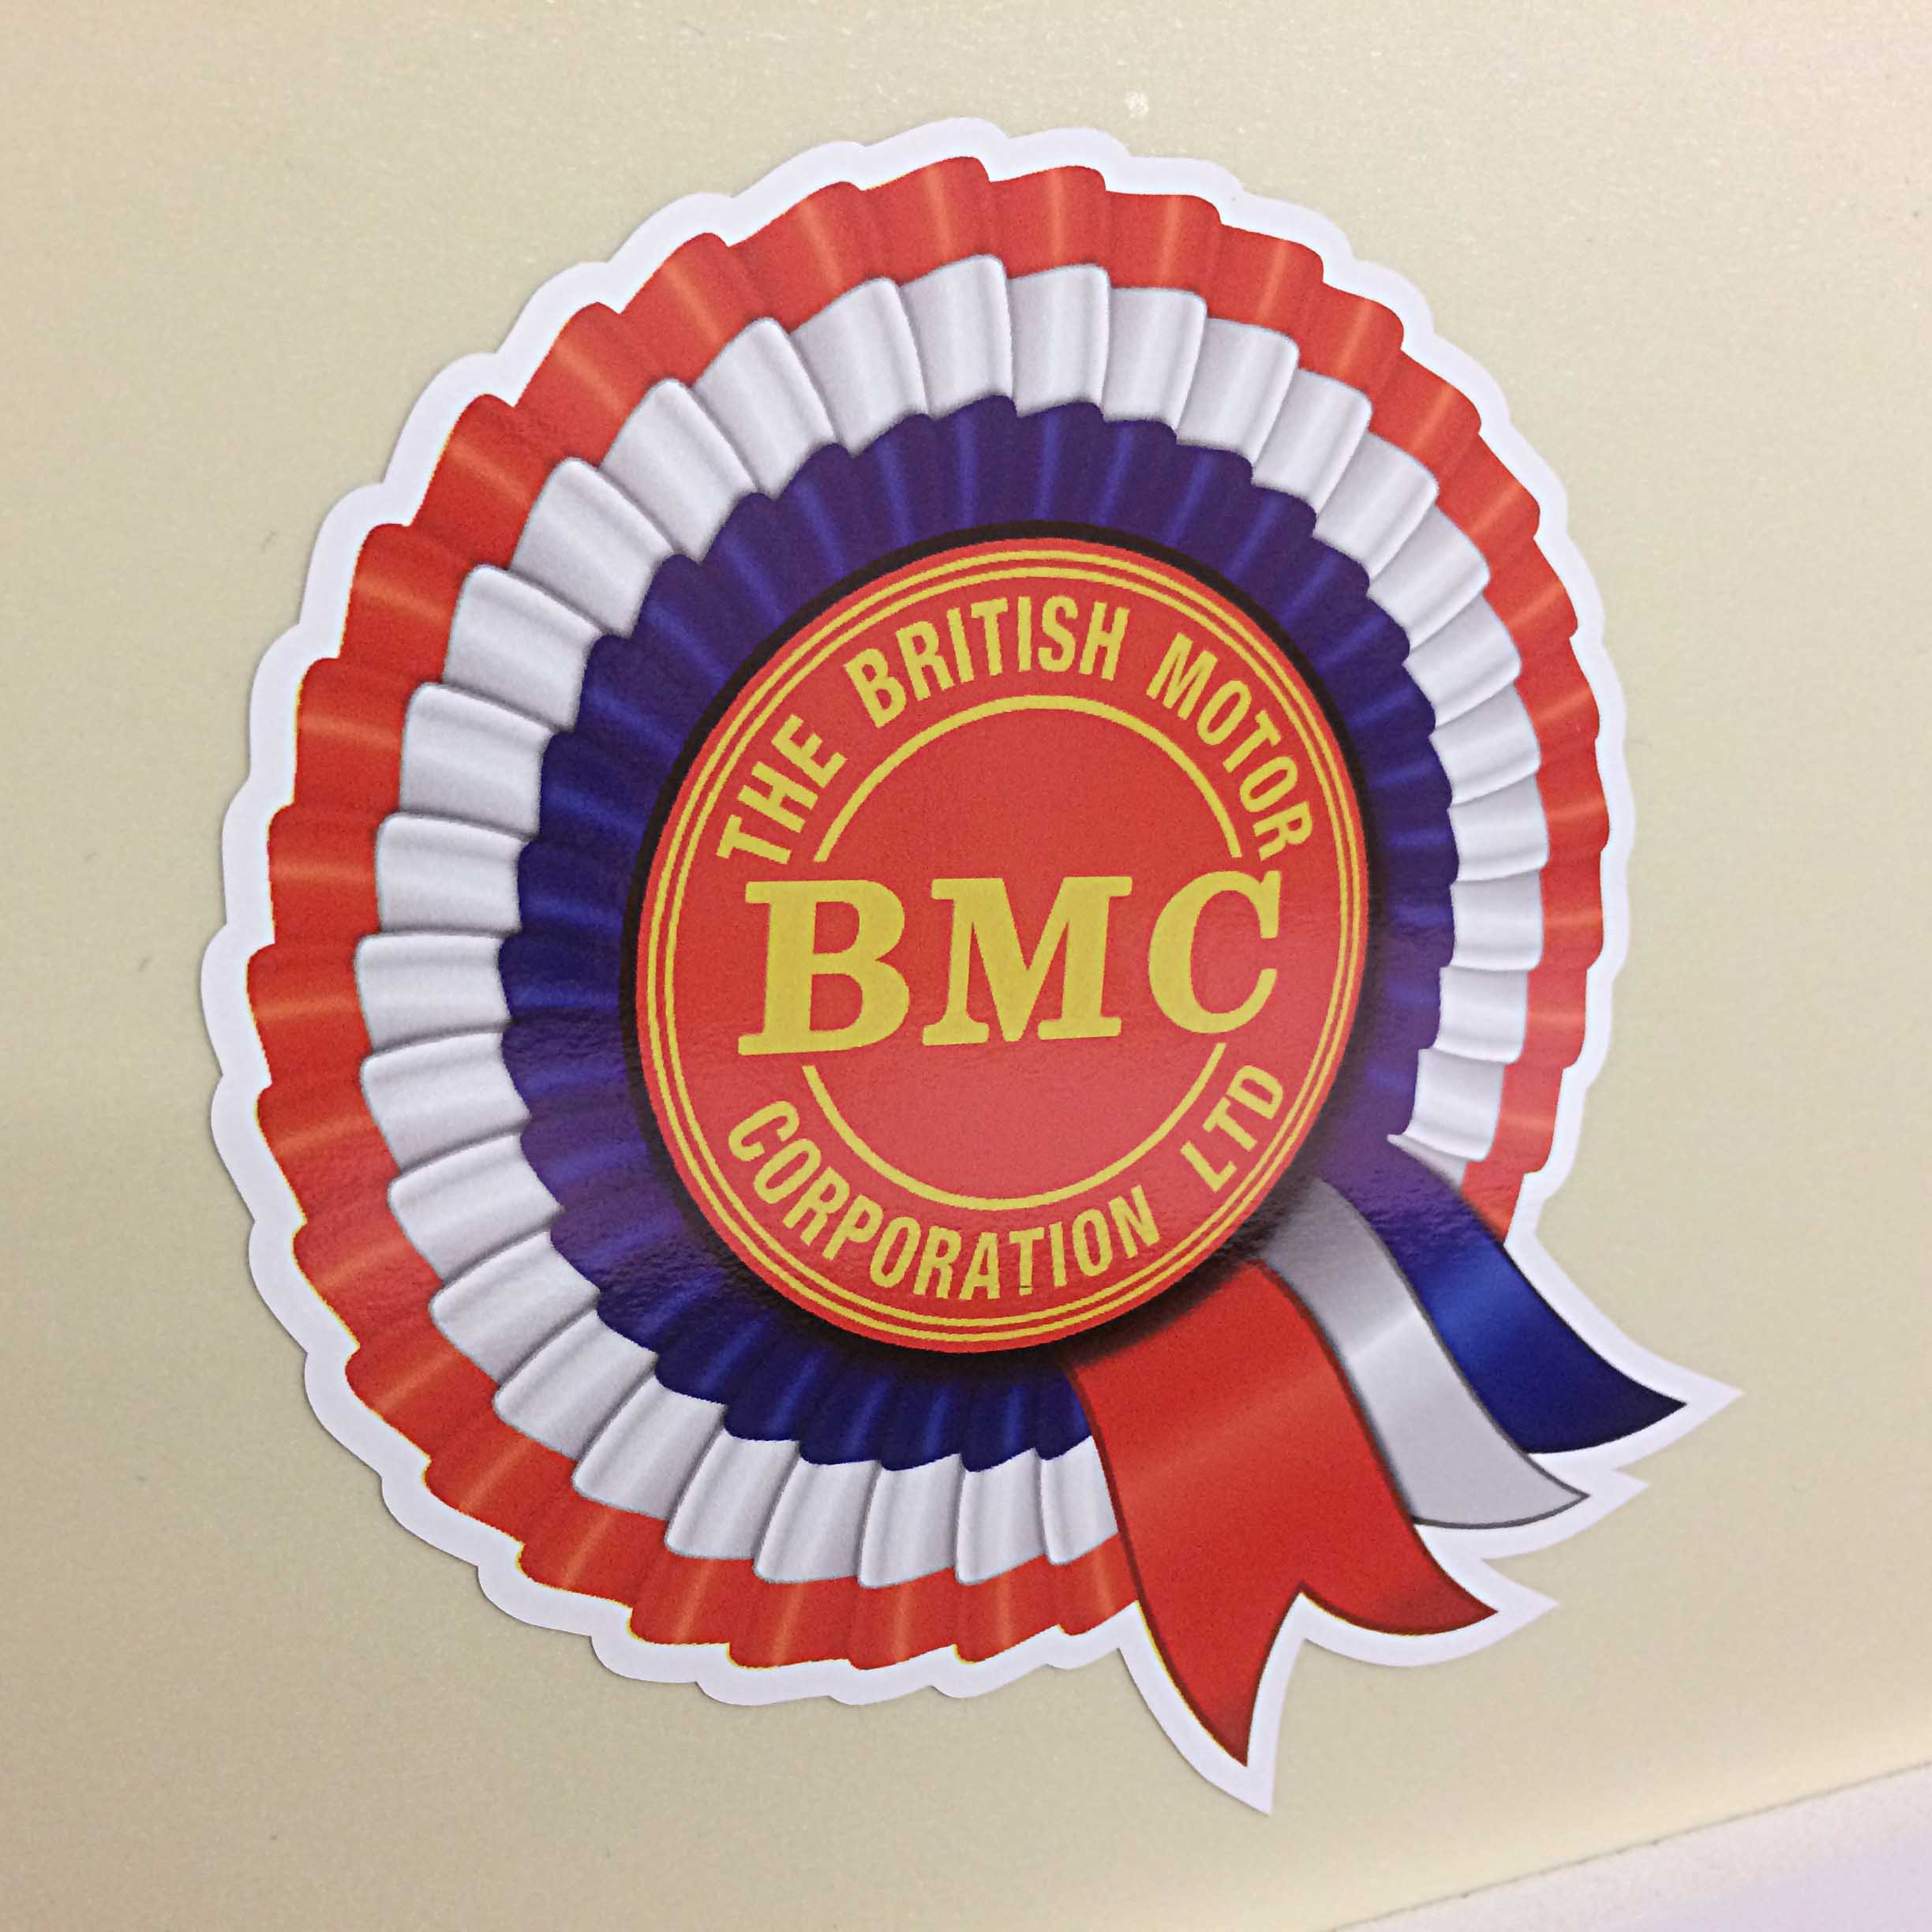 BMC The British Motor Corporation Ltd in yellow uppercase lettering surrounds a red disc in the centre of a red, white and blue rosette.